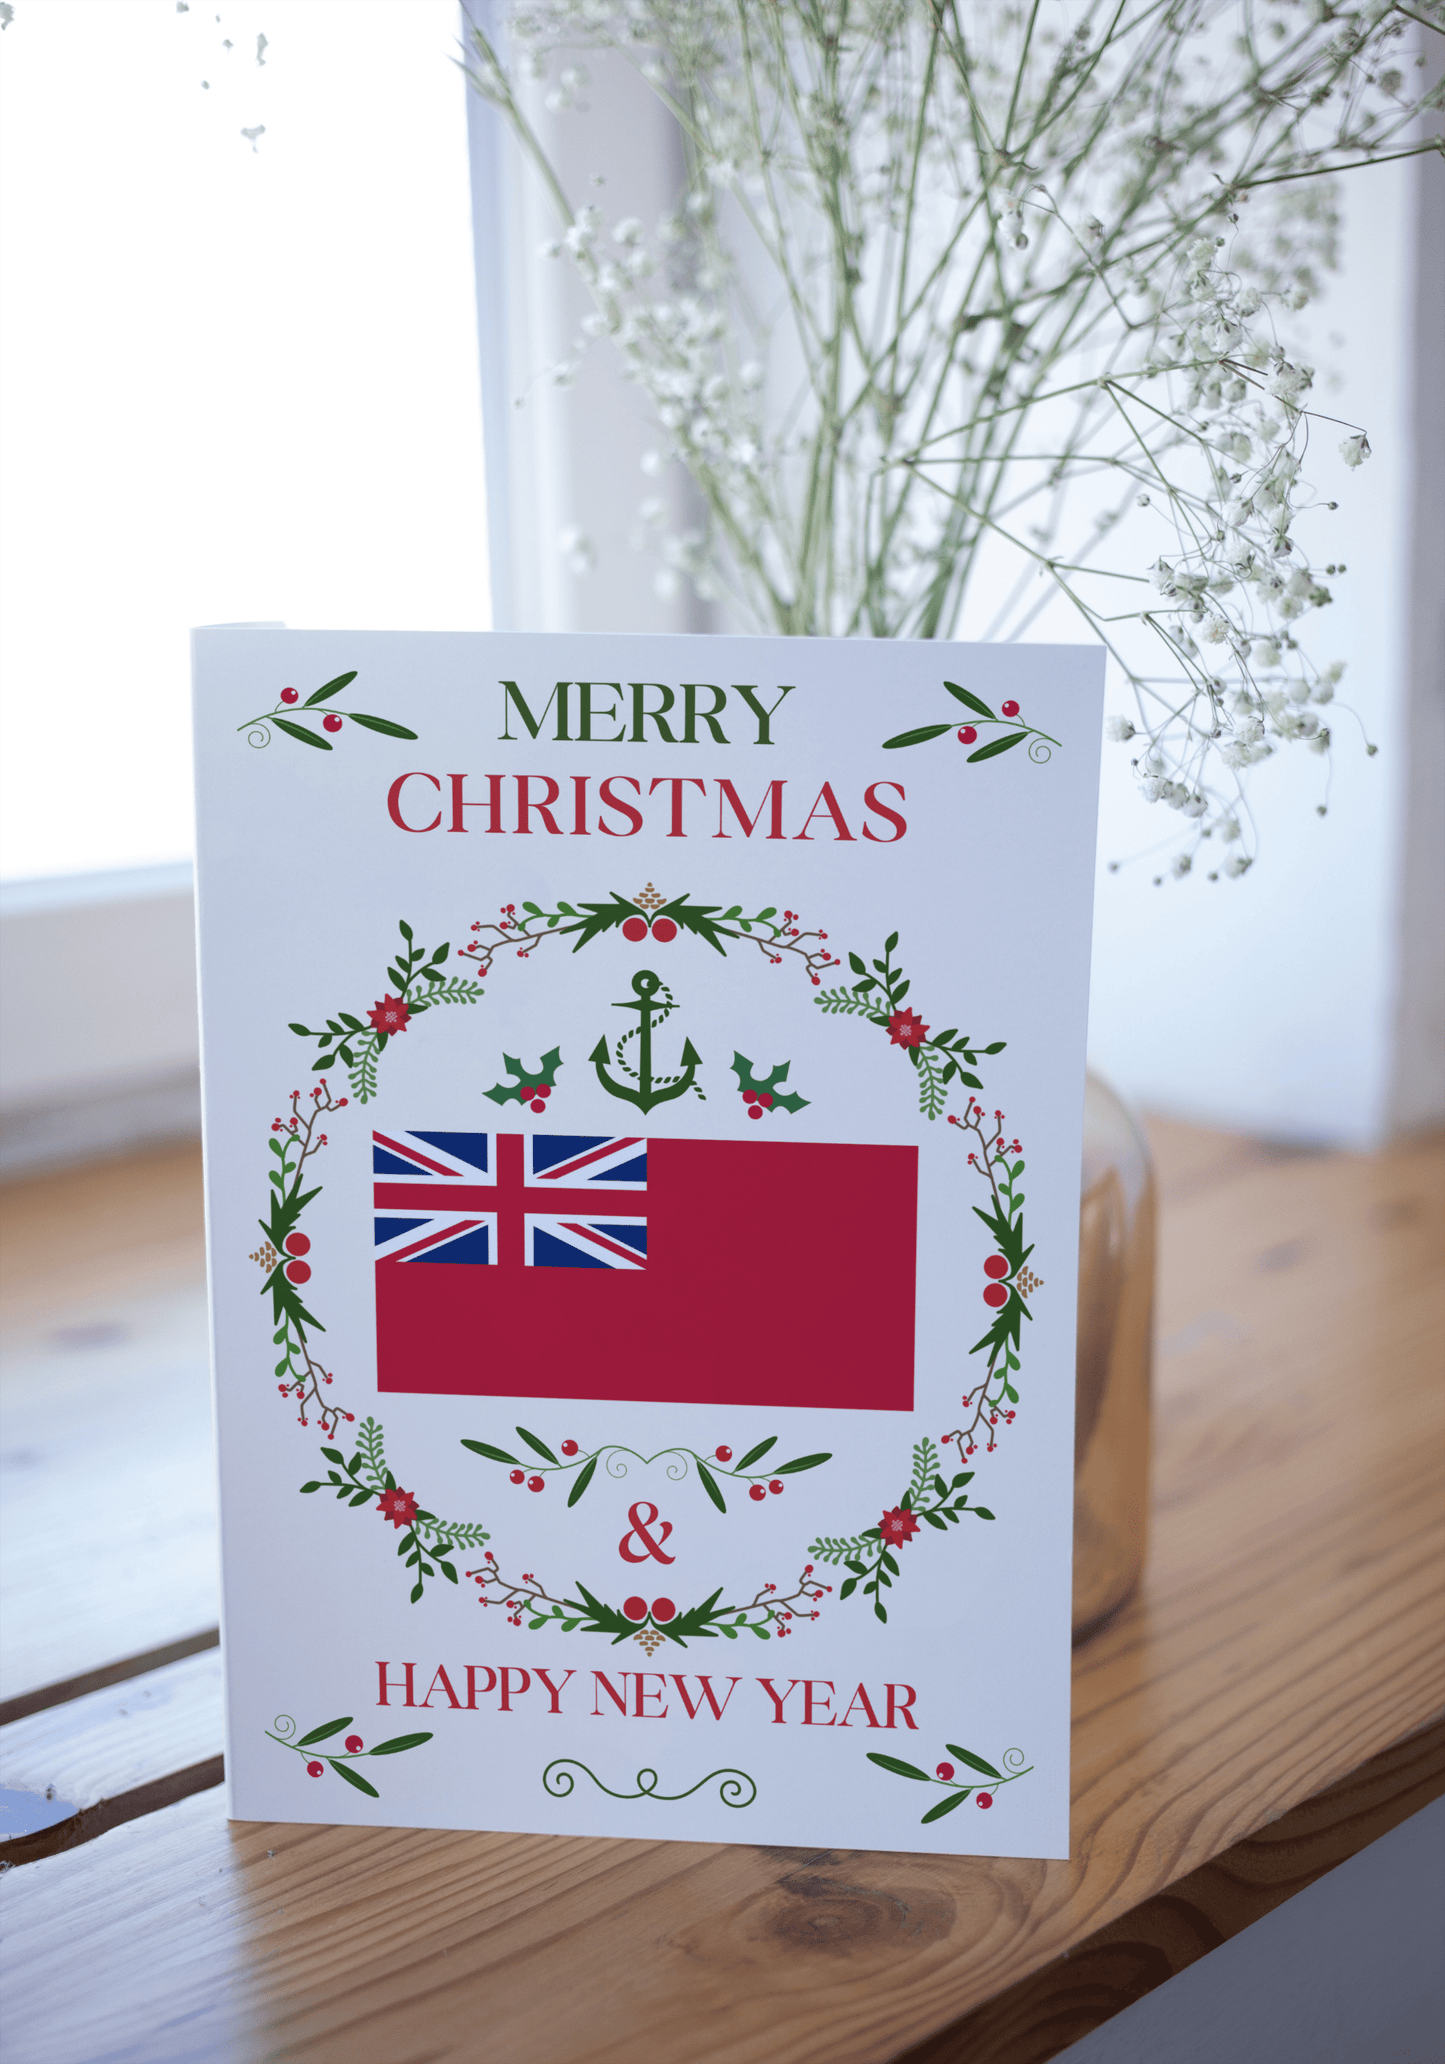 Nautical Christmas card, Merchant Navy red ensign, Christmas wreath and holly Great Harbour Gifts